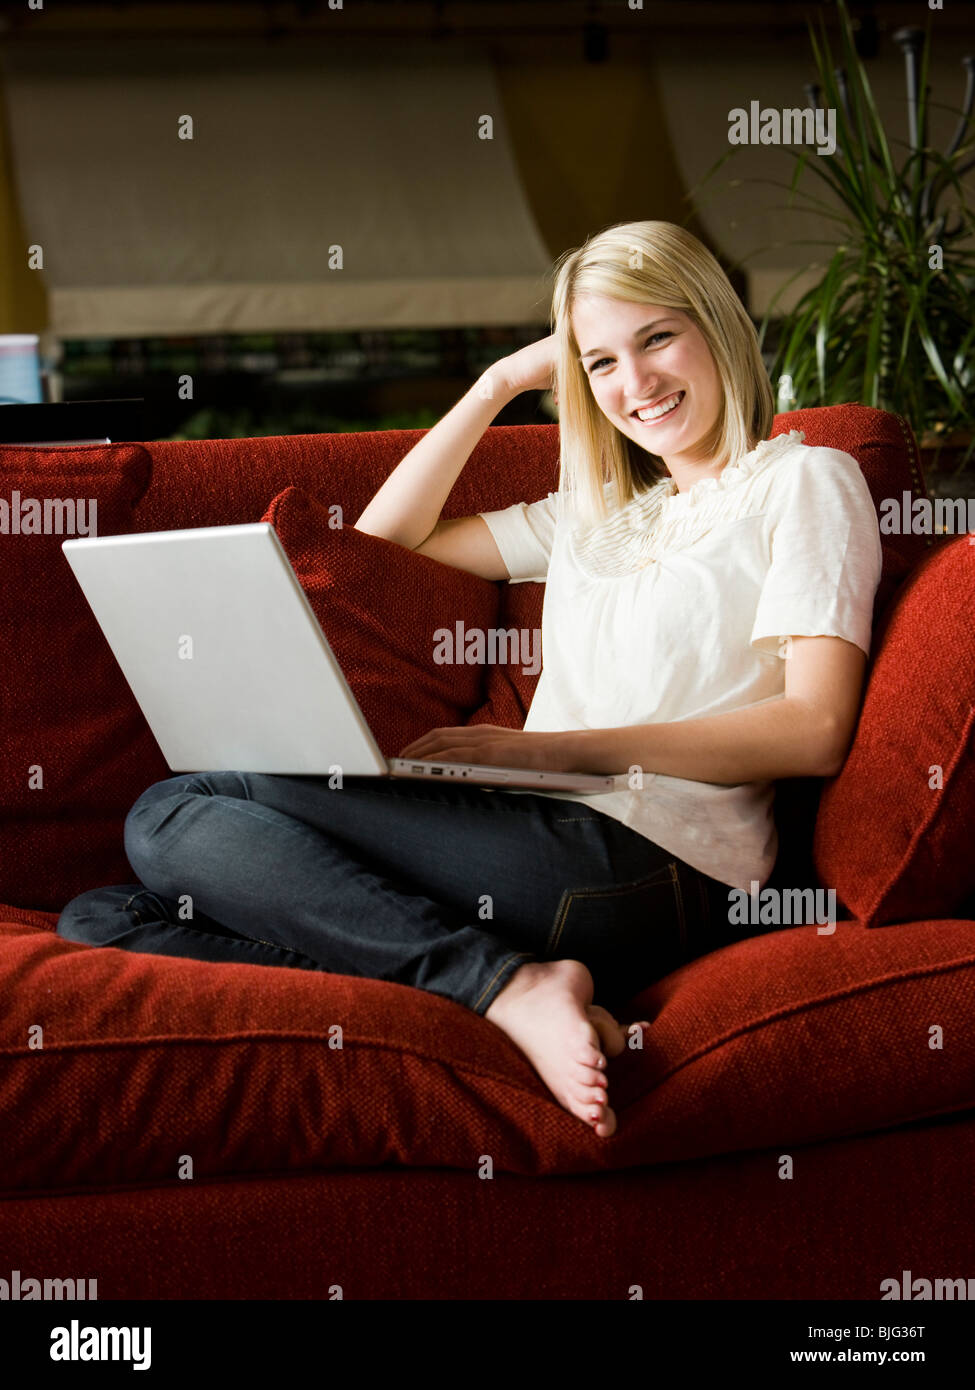 woman using a laptop on a sofa Stock Photo